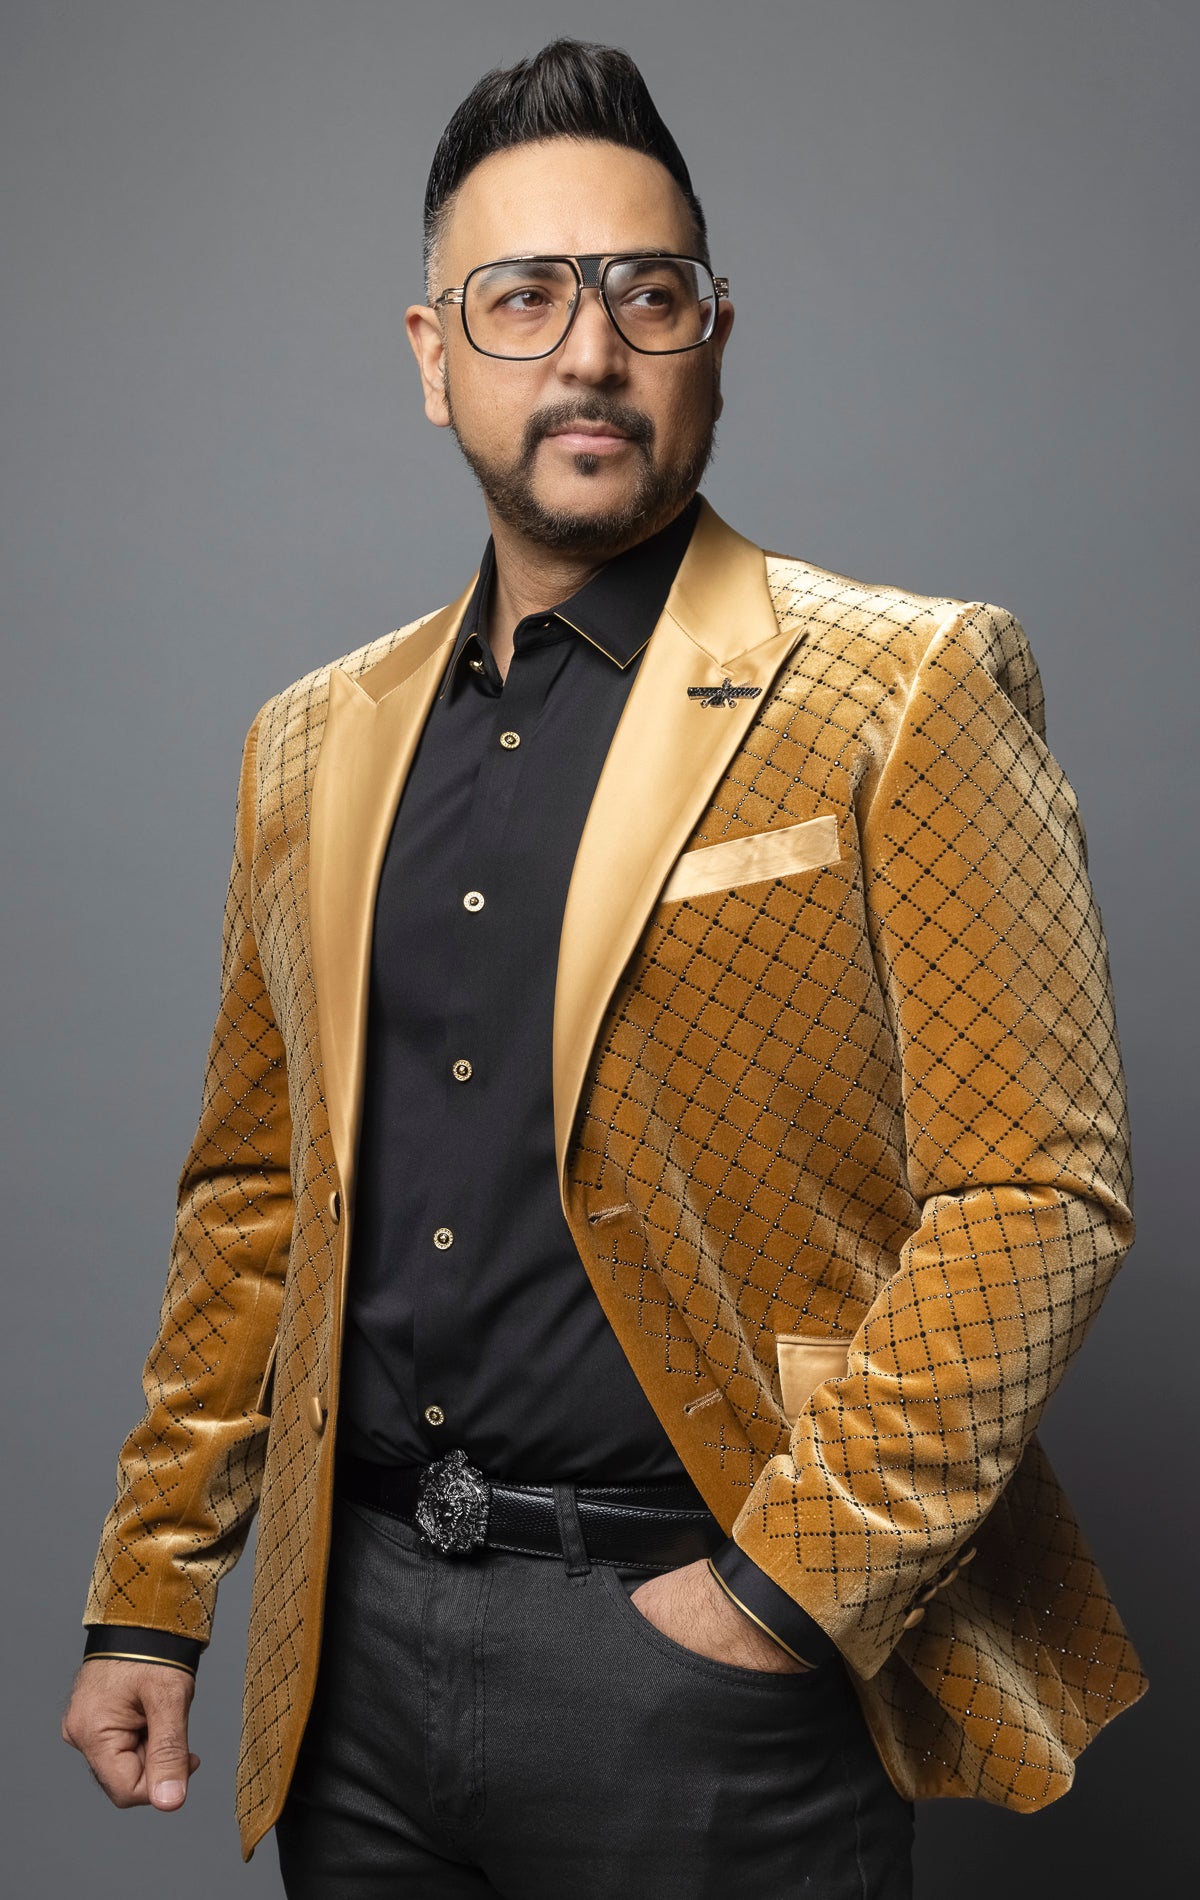 This jacket features a slim fit, with a narrow point-to-point shoulder measurement and higher armholes for a modern silhouette. Its diamond-shaped design and notch lapel add a touch of sophistication. The long sleeves, two-button closure, and four-button cuffs provide a classic look, while the front welt chest and hip pockets offer practicality. Additionally, there is an interior pocket for extra storage.